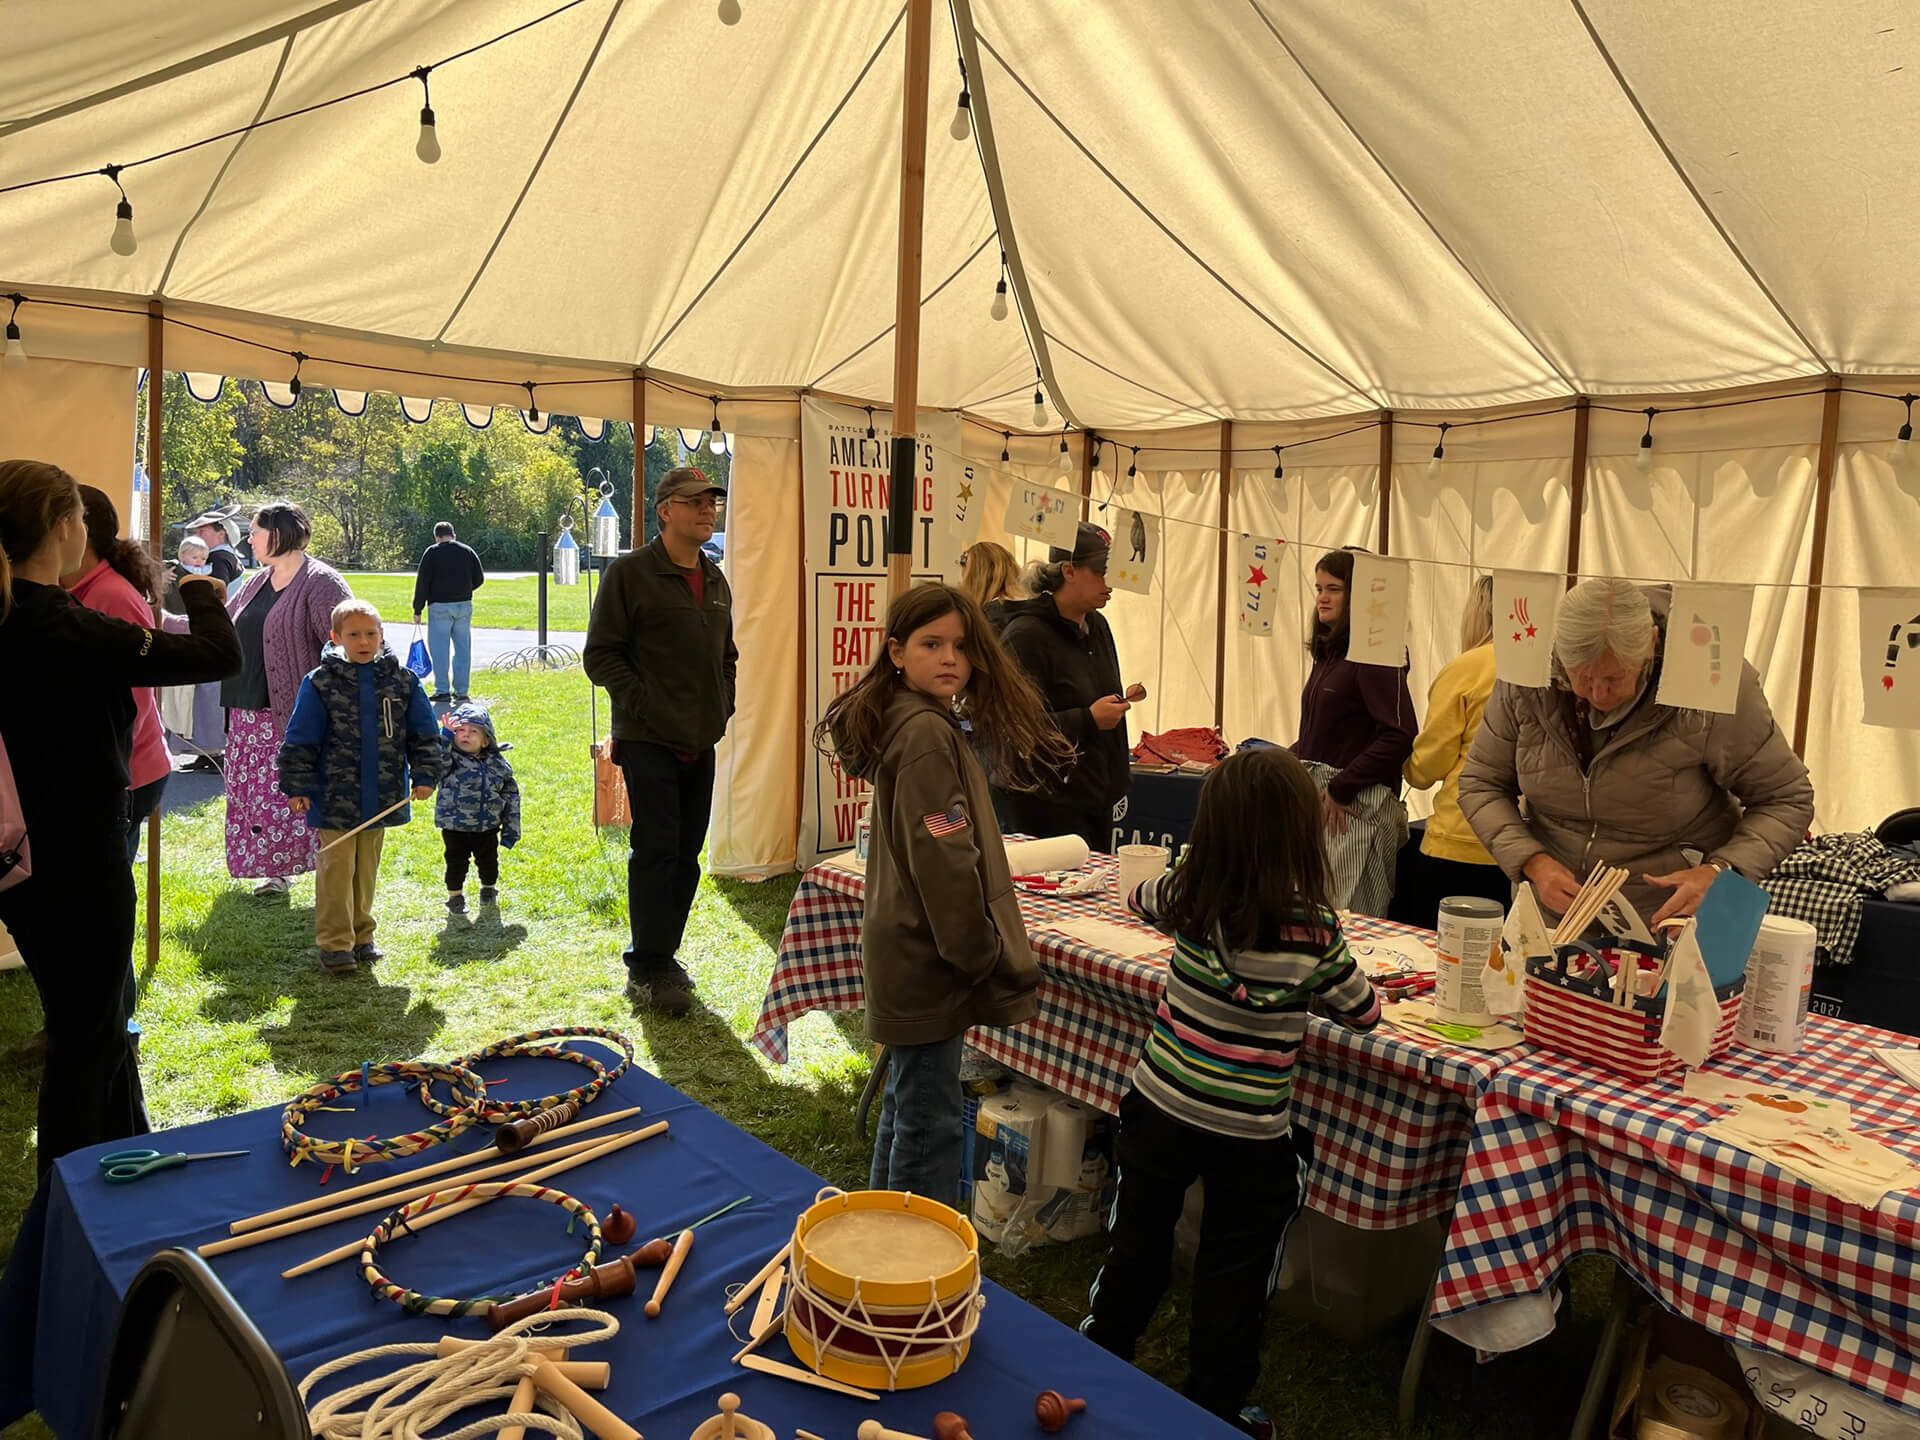 People gathered inside a Saratoga 250 tent with Revolutionary War era games and crafts